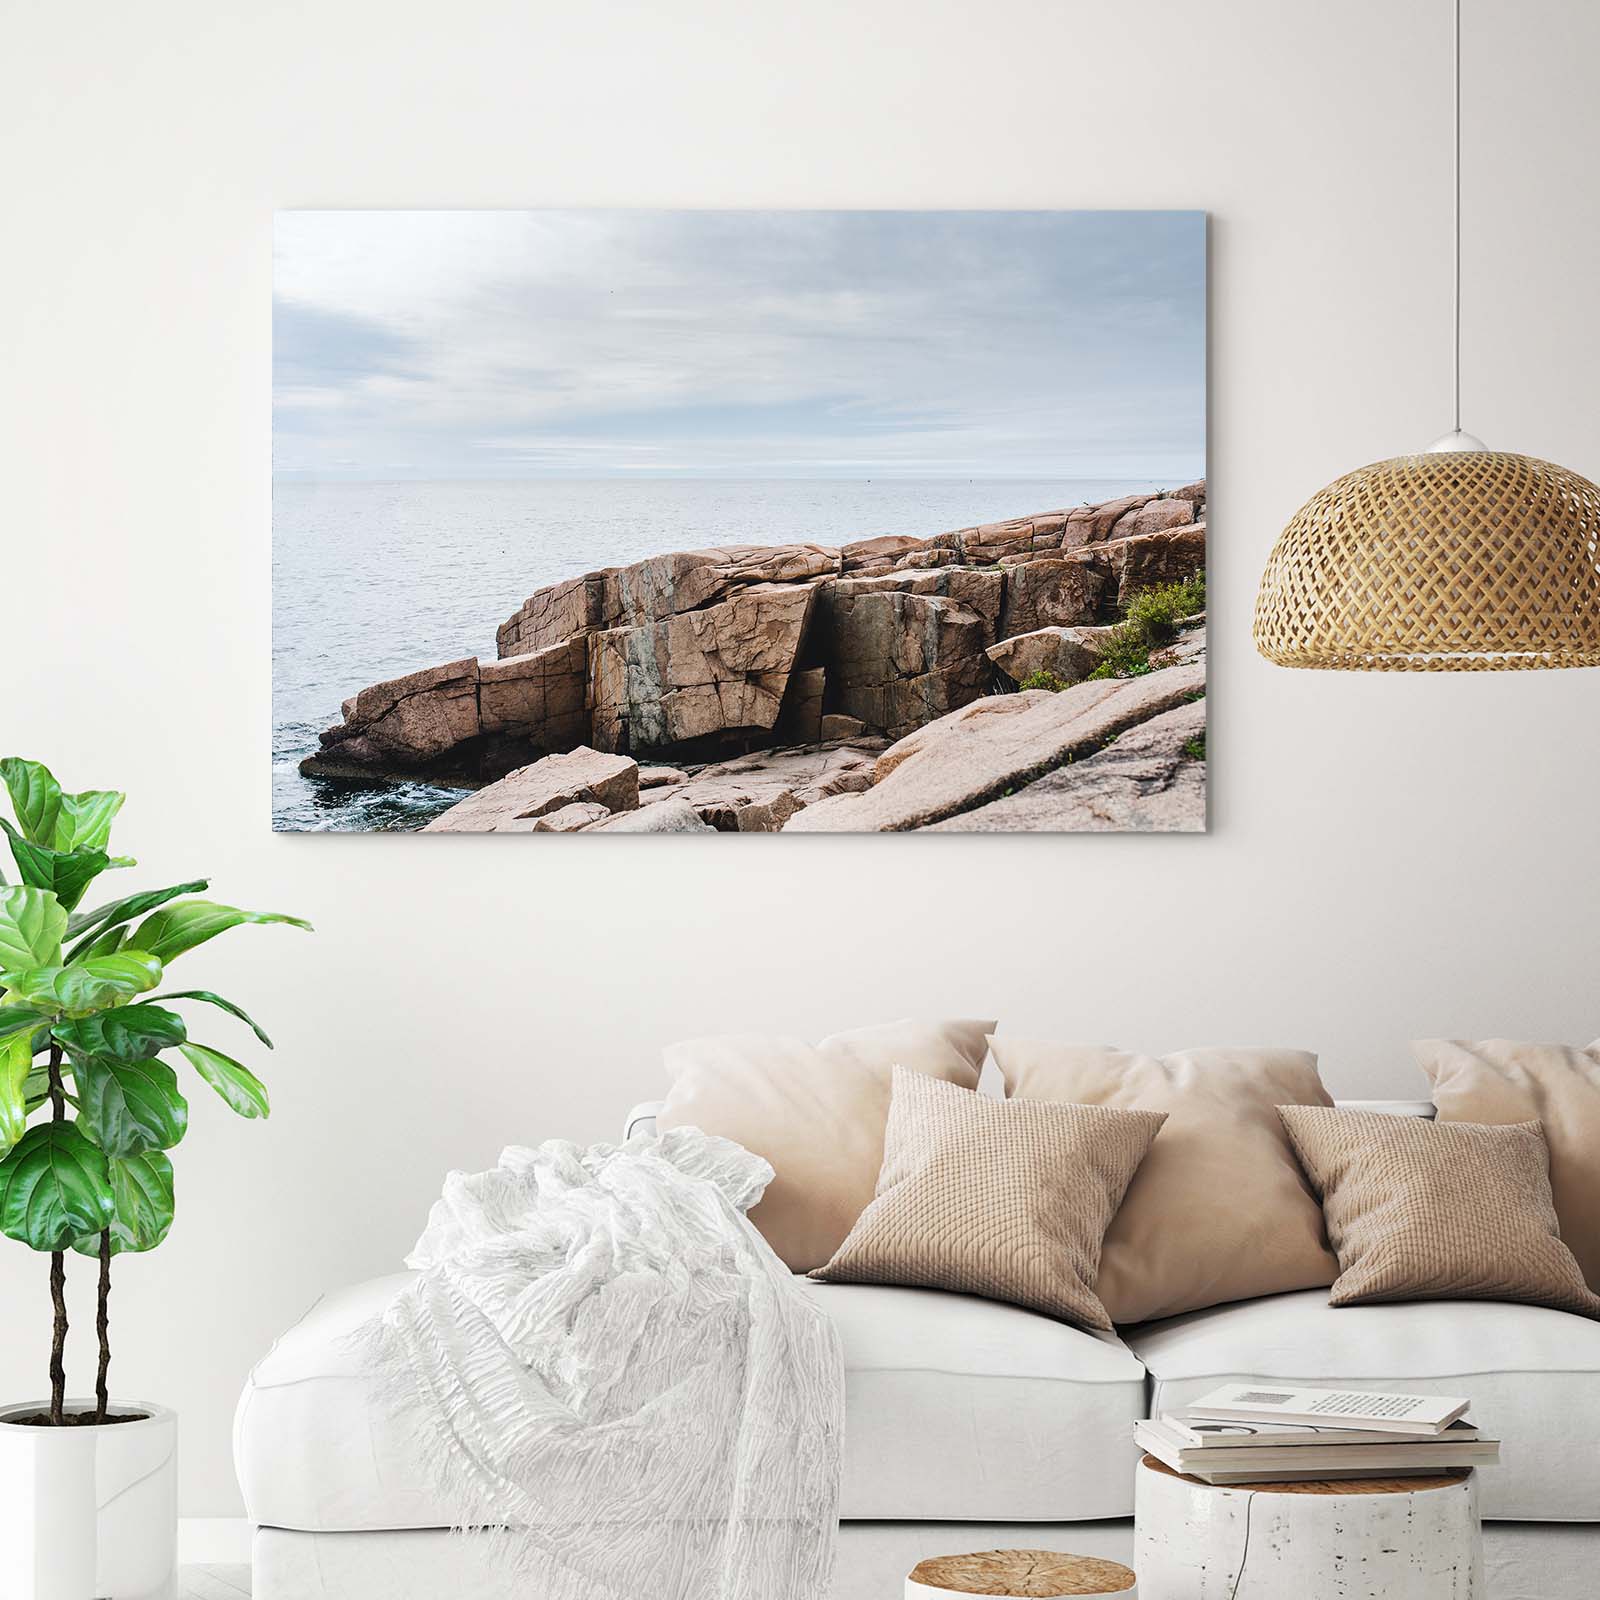 The Rocks - Canvas Print by The Caviness Collective | Art Bloom Canvas Art